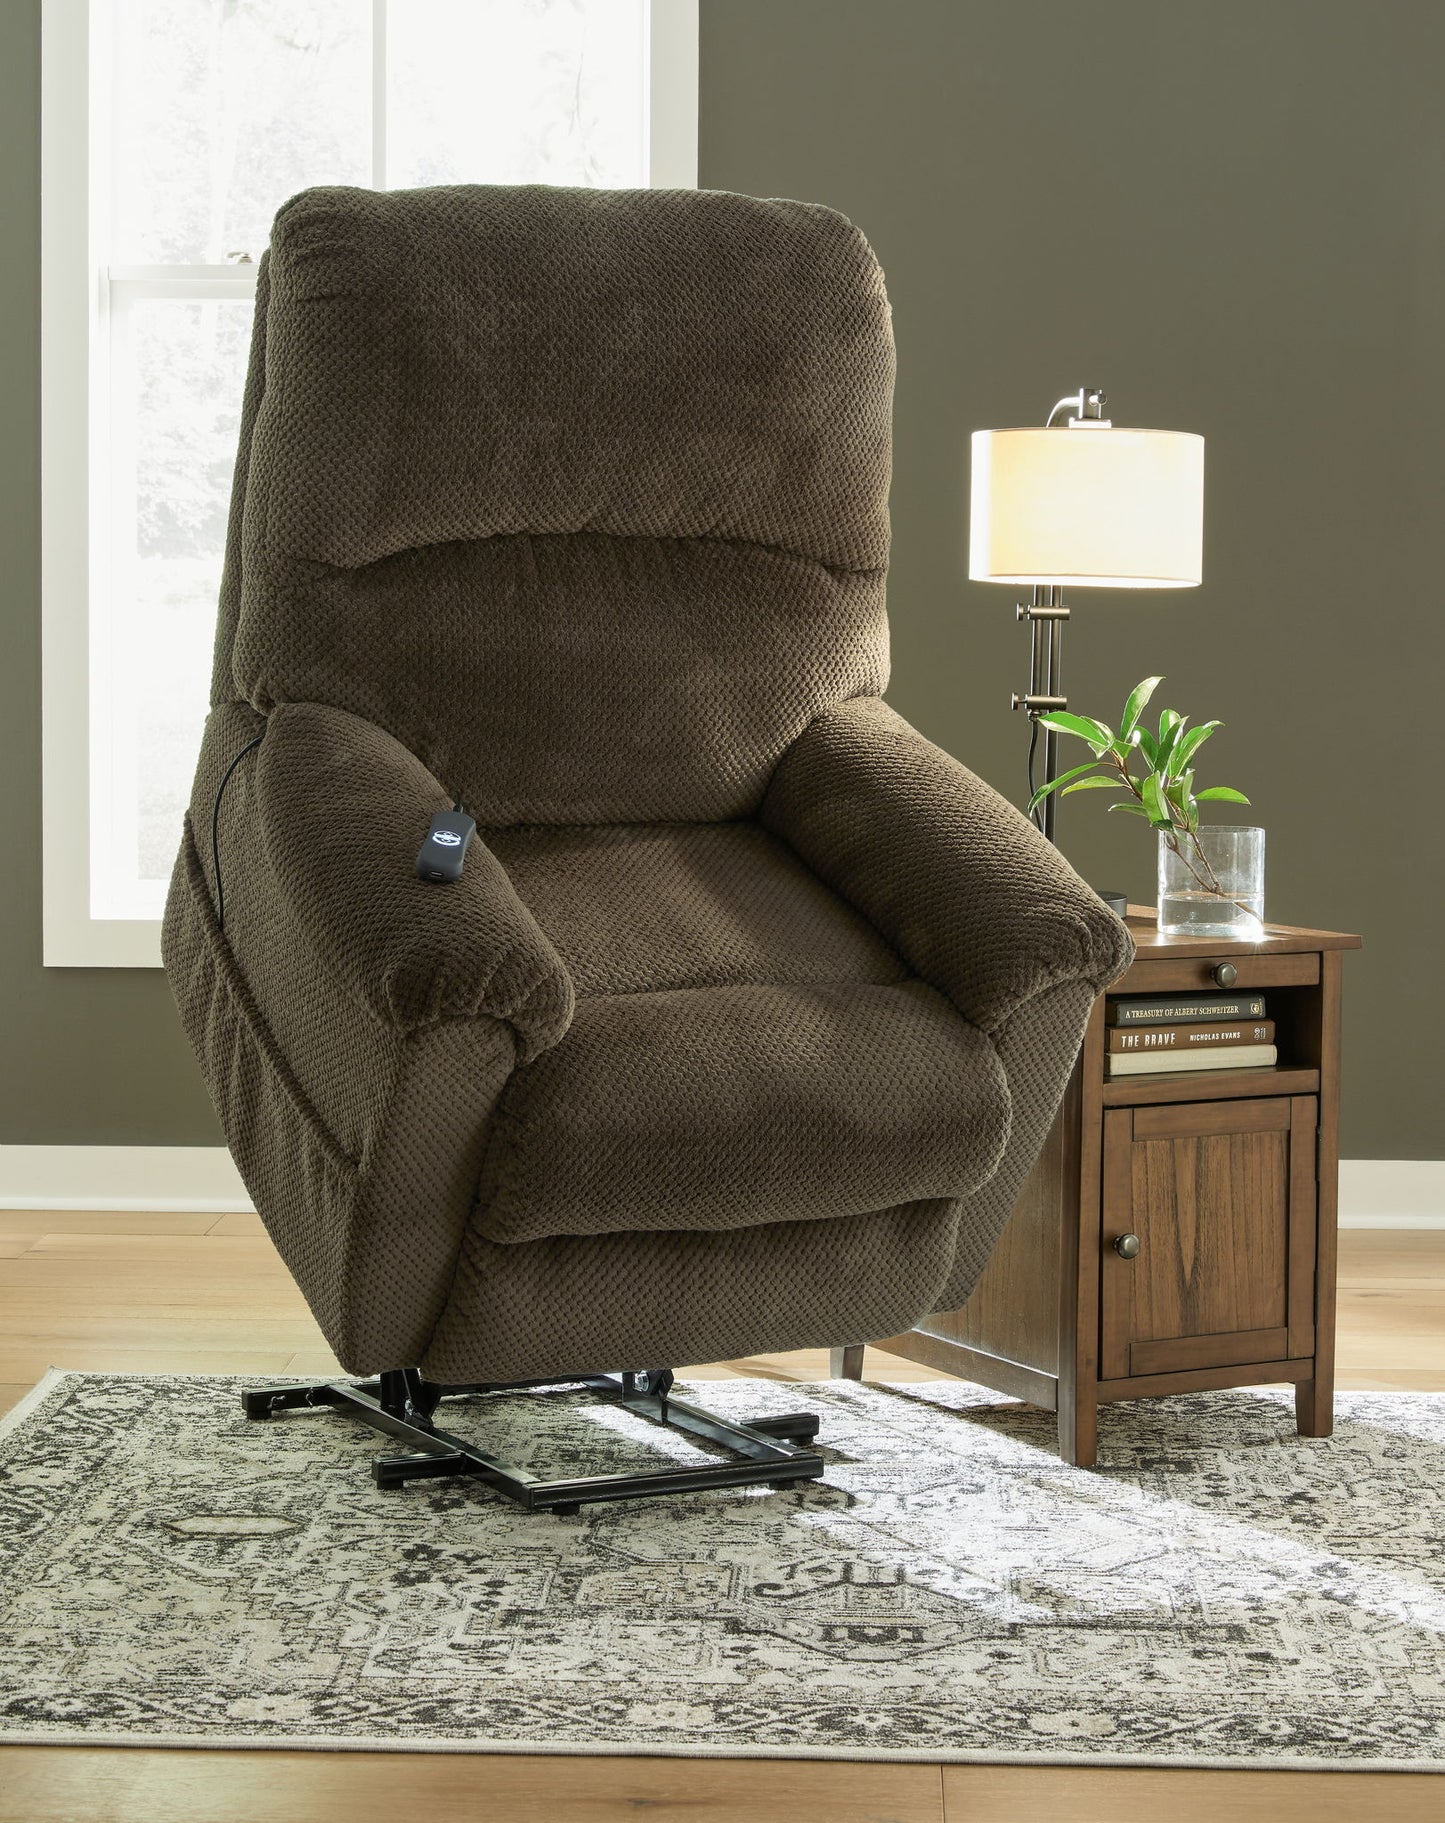 Shadowboxer - Chocolate - Power Lift Recliner